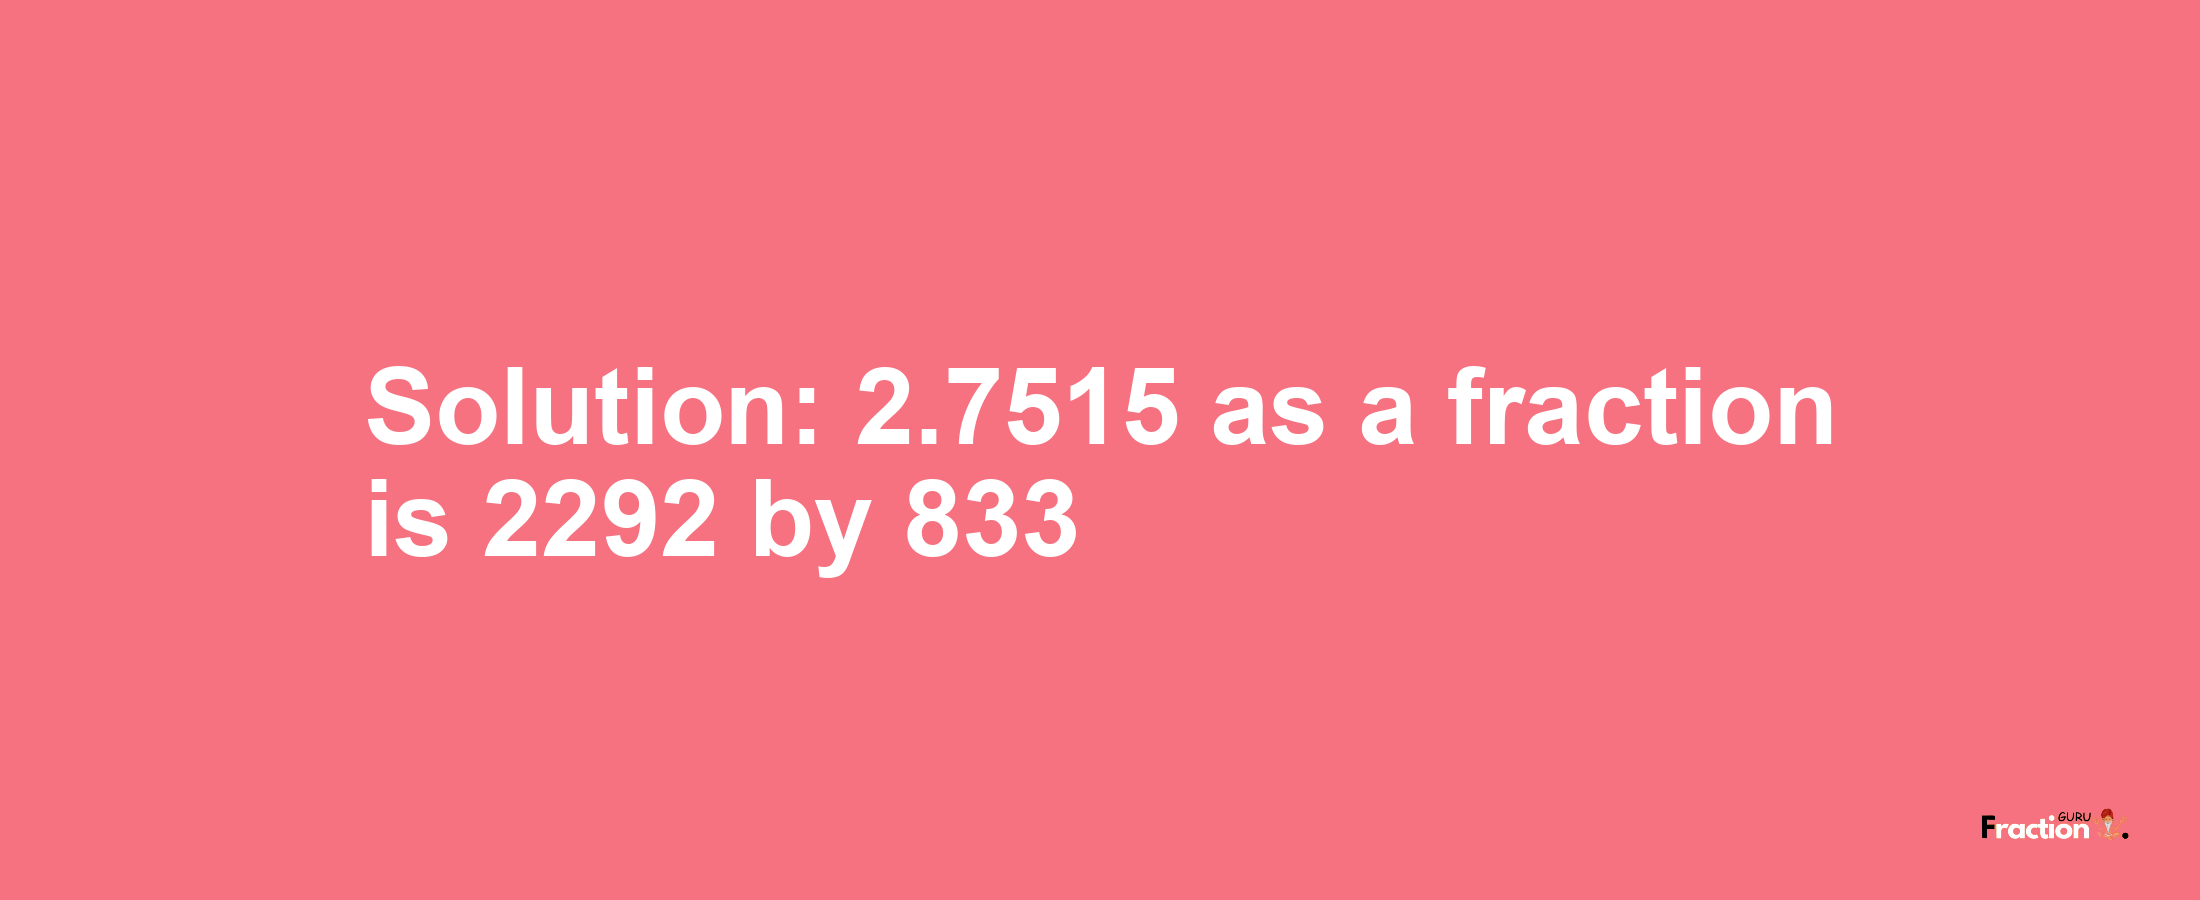 Solution:2.7515 as a fraction is 2292/833